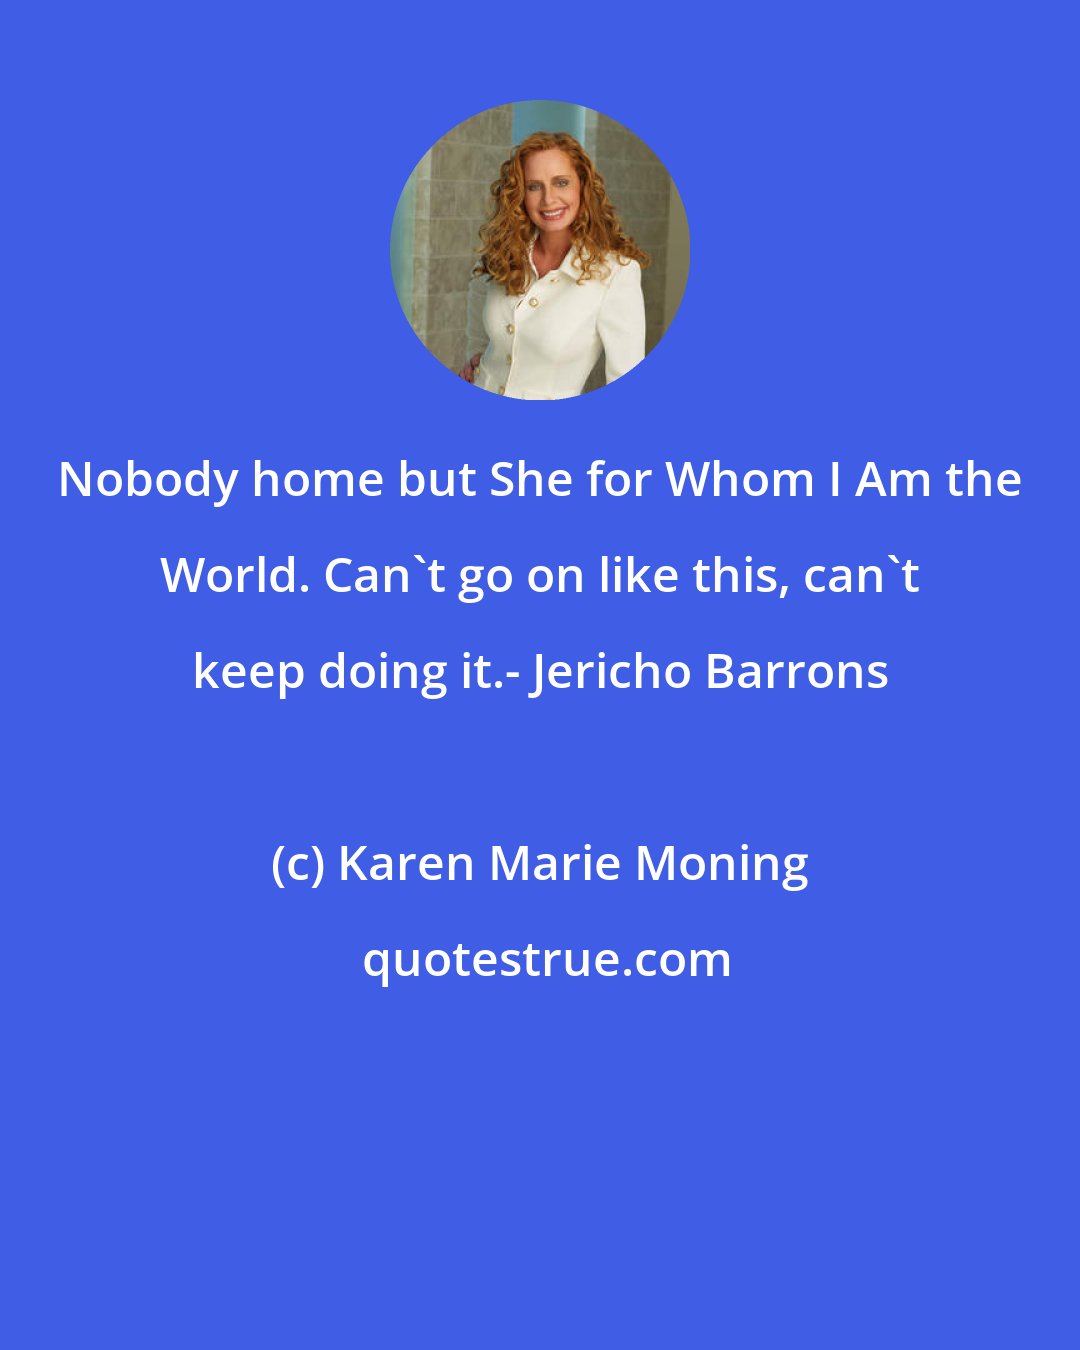 Karen Marie Moning: Nobody home but She for Whom I Am the World. Can't go on like this, can't keep doing it.- Jericho Barrons